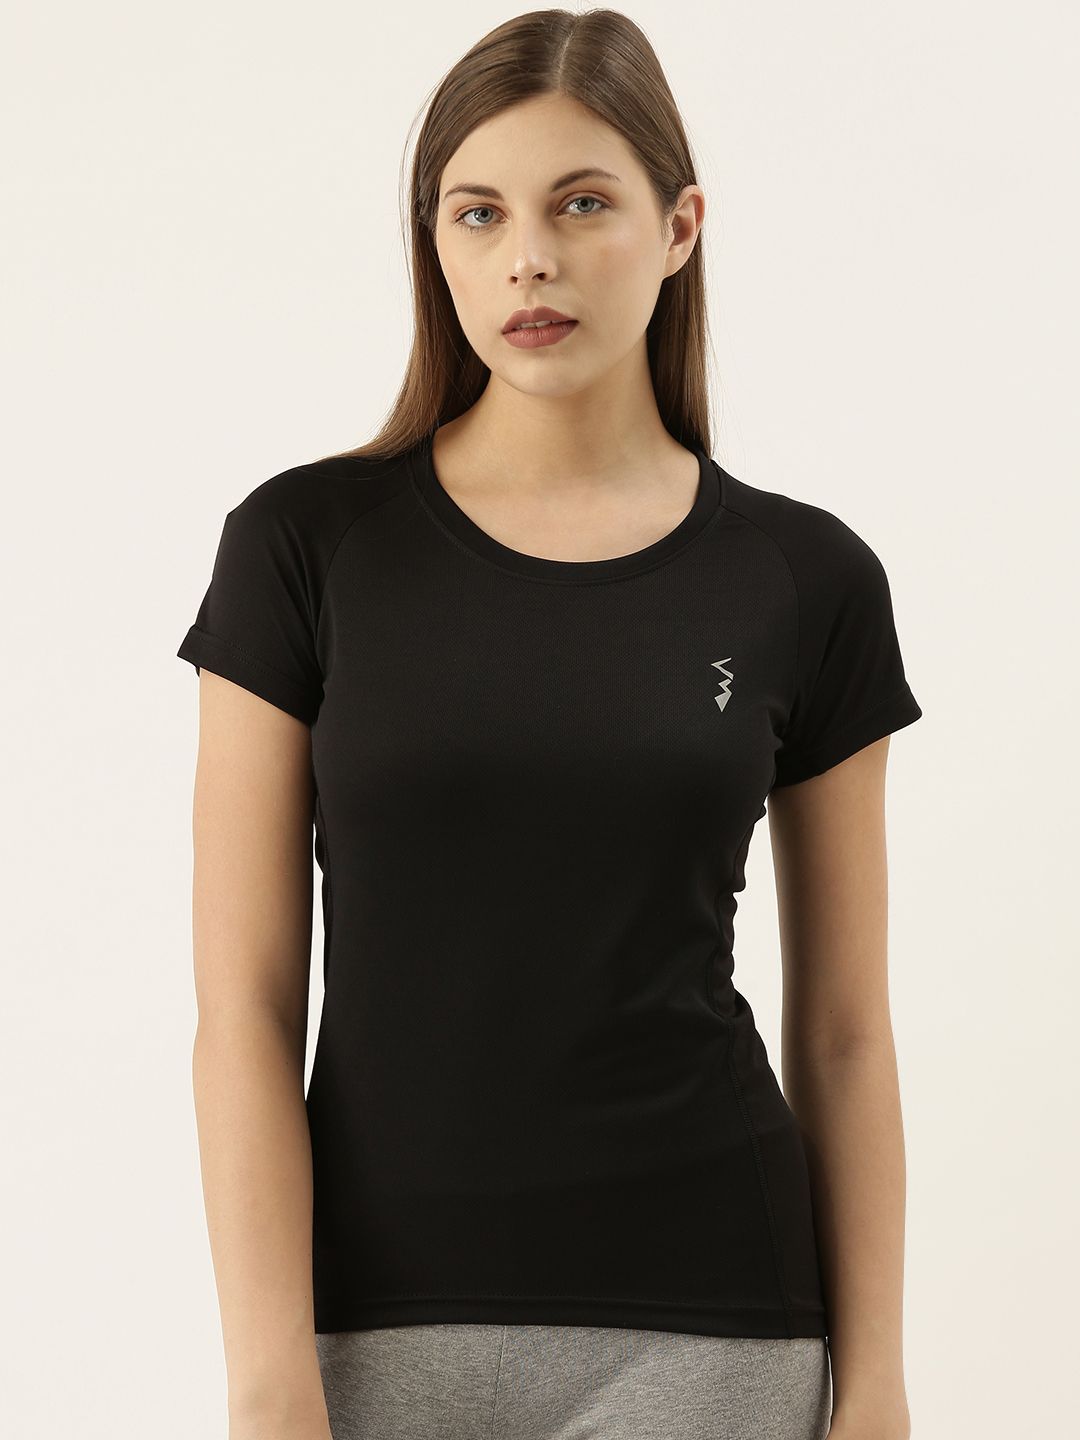 Campus Sutra Women Black Solid Round Neck T-shirt Price in India